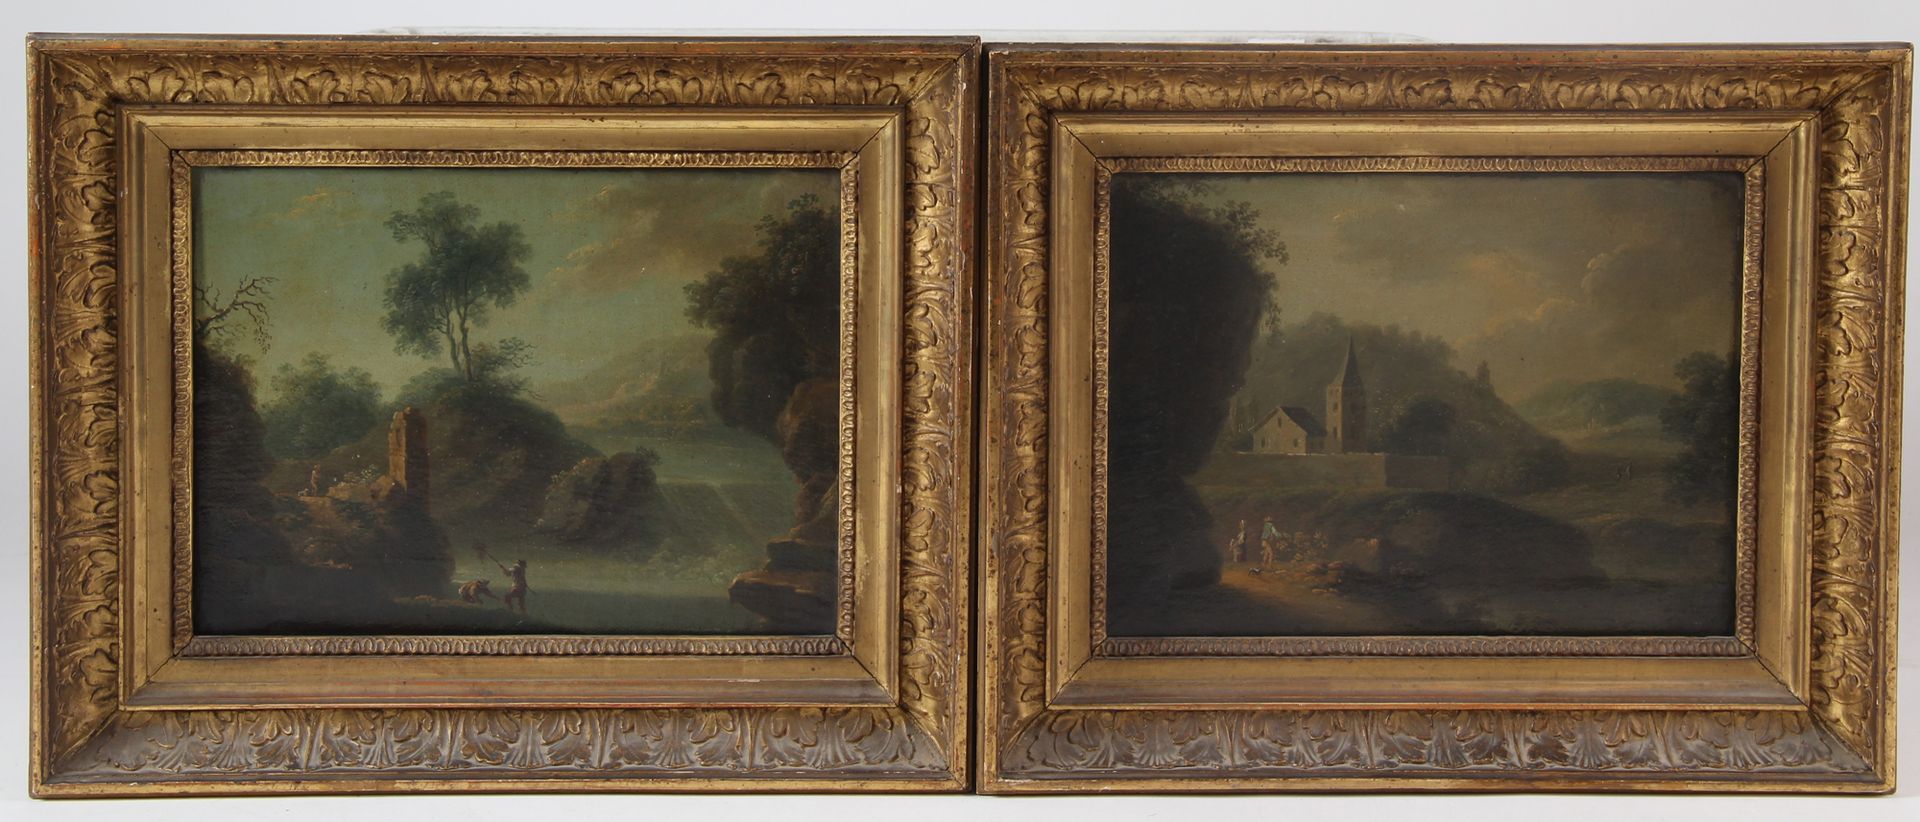 Null LATE 18TH-EARLY 19TH CENTURY FRENCH SCHOOL

Two paintings: 

- Fishermen by&hellip;